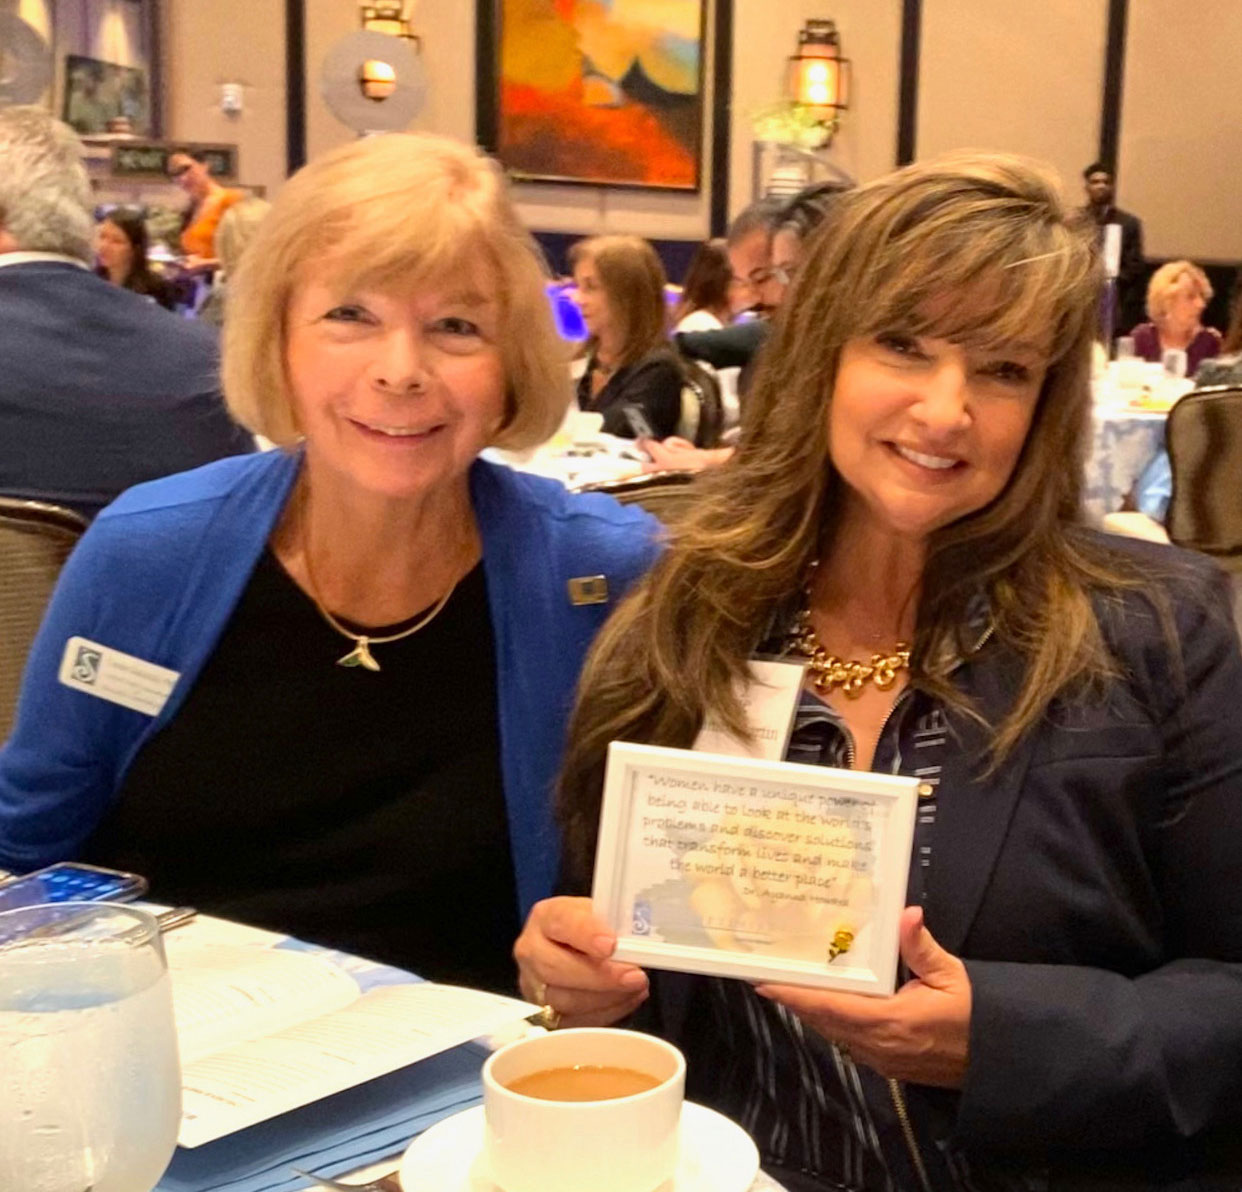 Connie Siskowski, AACY Founder and President and Rosie Inguanzo-Martin, Allegiance Home Health CEO and President